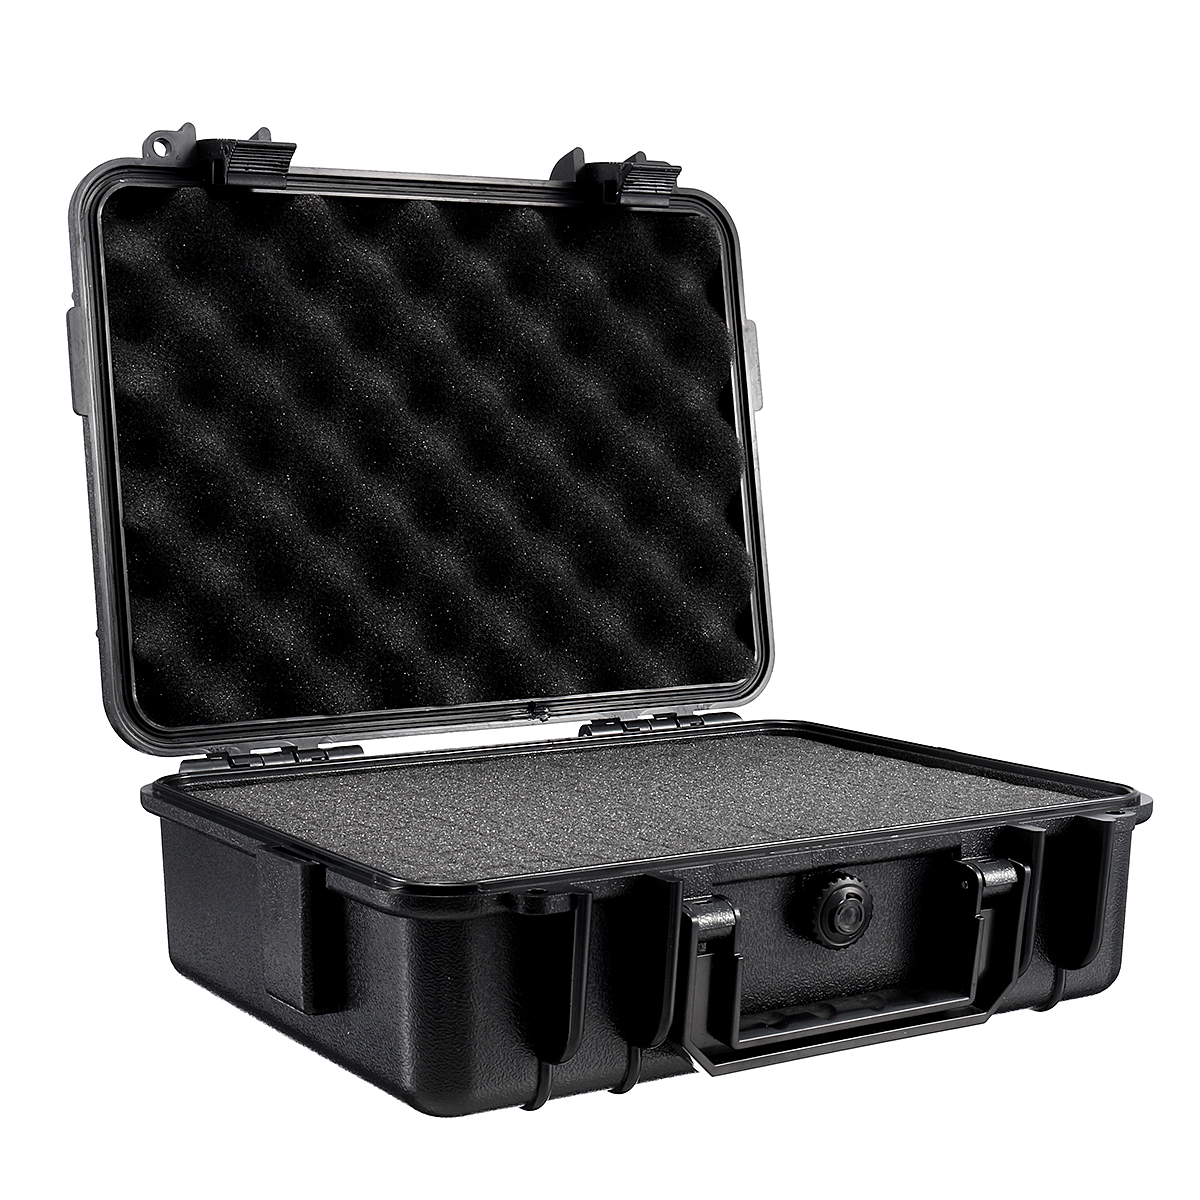 Waterproof-Hard-Carry-Tool-Case-Bag-Storage-Box-Camera-Photography-with-Sponge-18012050mm-1661734-2